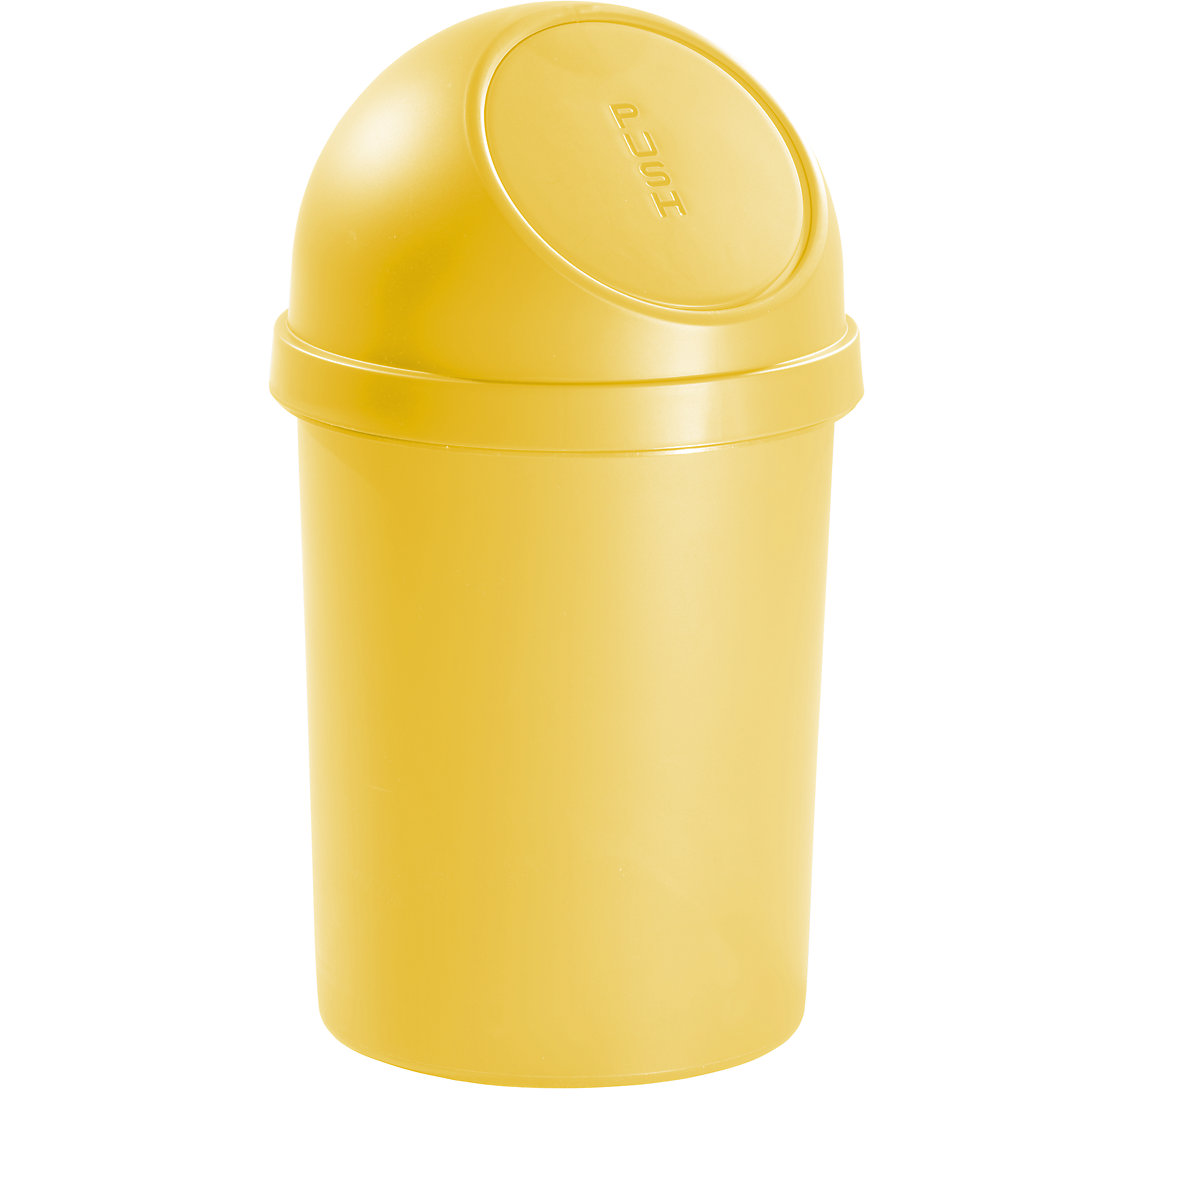 Push top waste bin made of plastic – helit, capacity 45 l, pack of 2, HxØ 700 x 400 mm, yellow-3